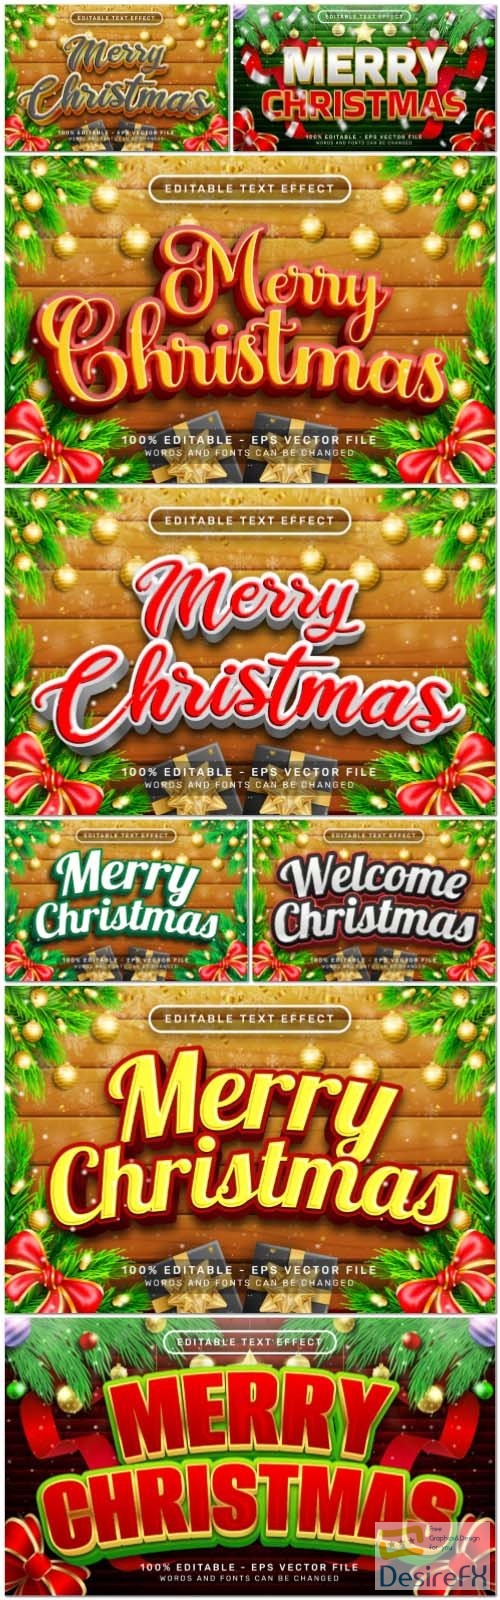 Merry christmas 3d text effect in vector